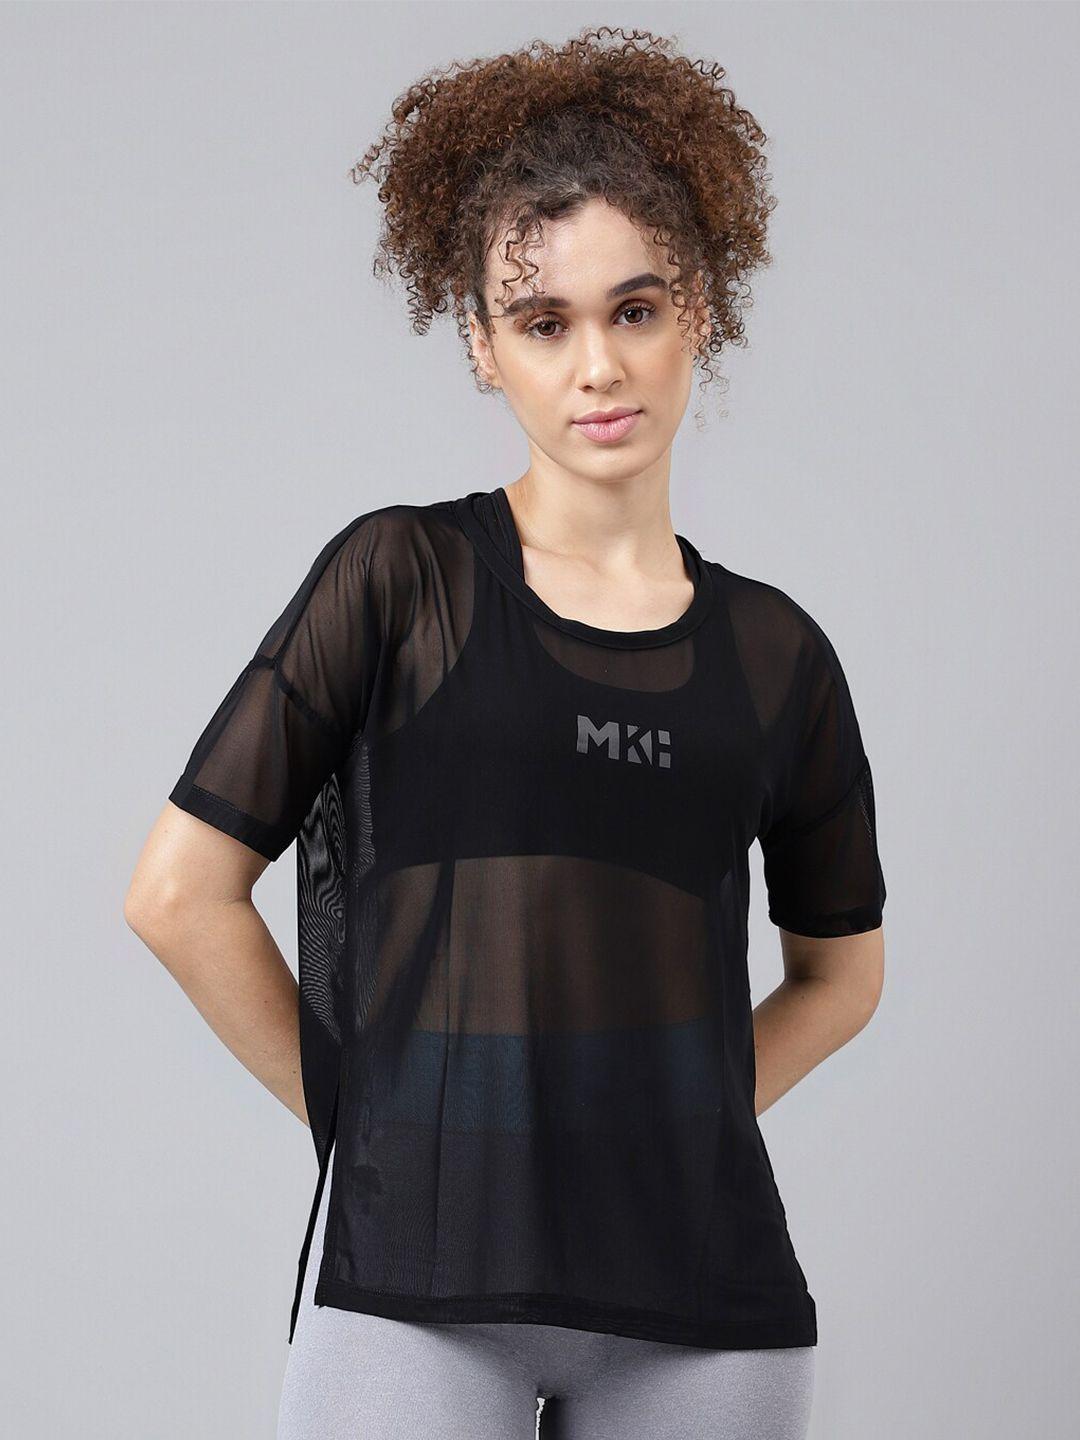 mkh typography printed relaxed fit dri-fit t-shirt